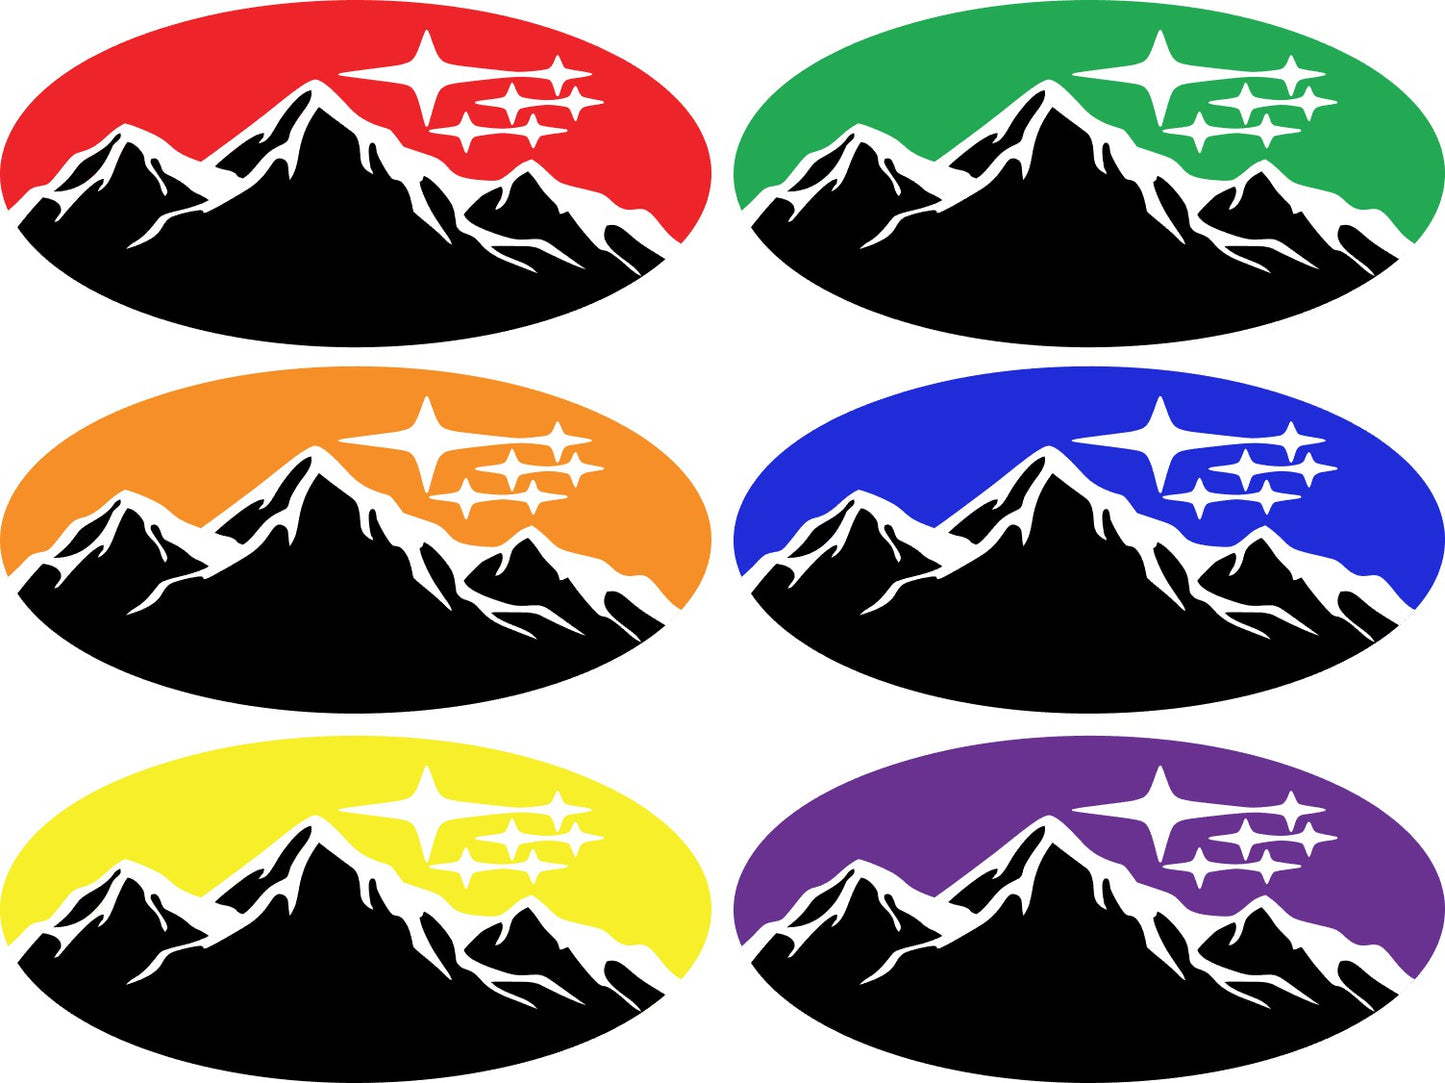 Two-Color Mountain *Stars in the Sky* Emblem Overlay Decal Set